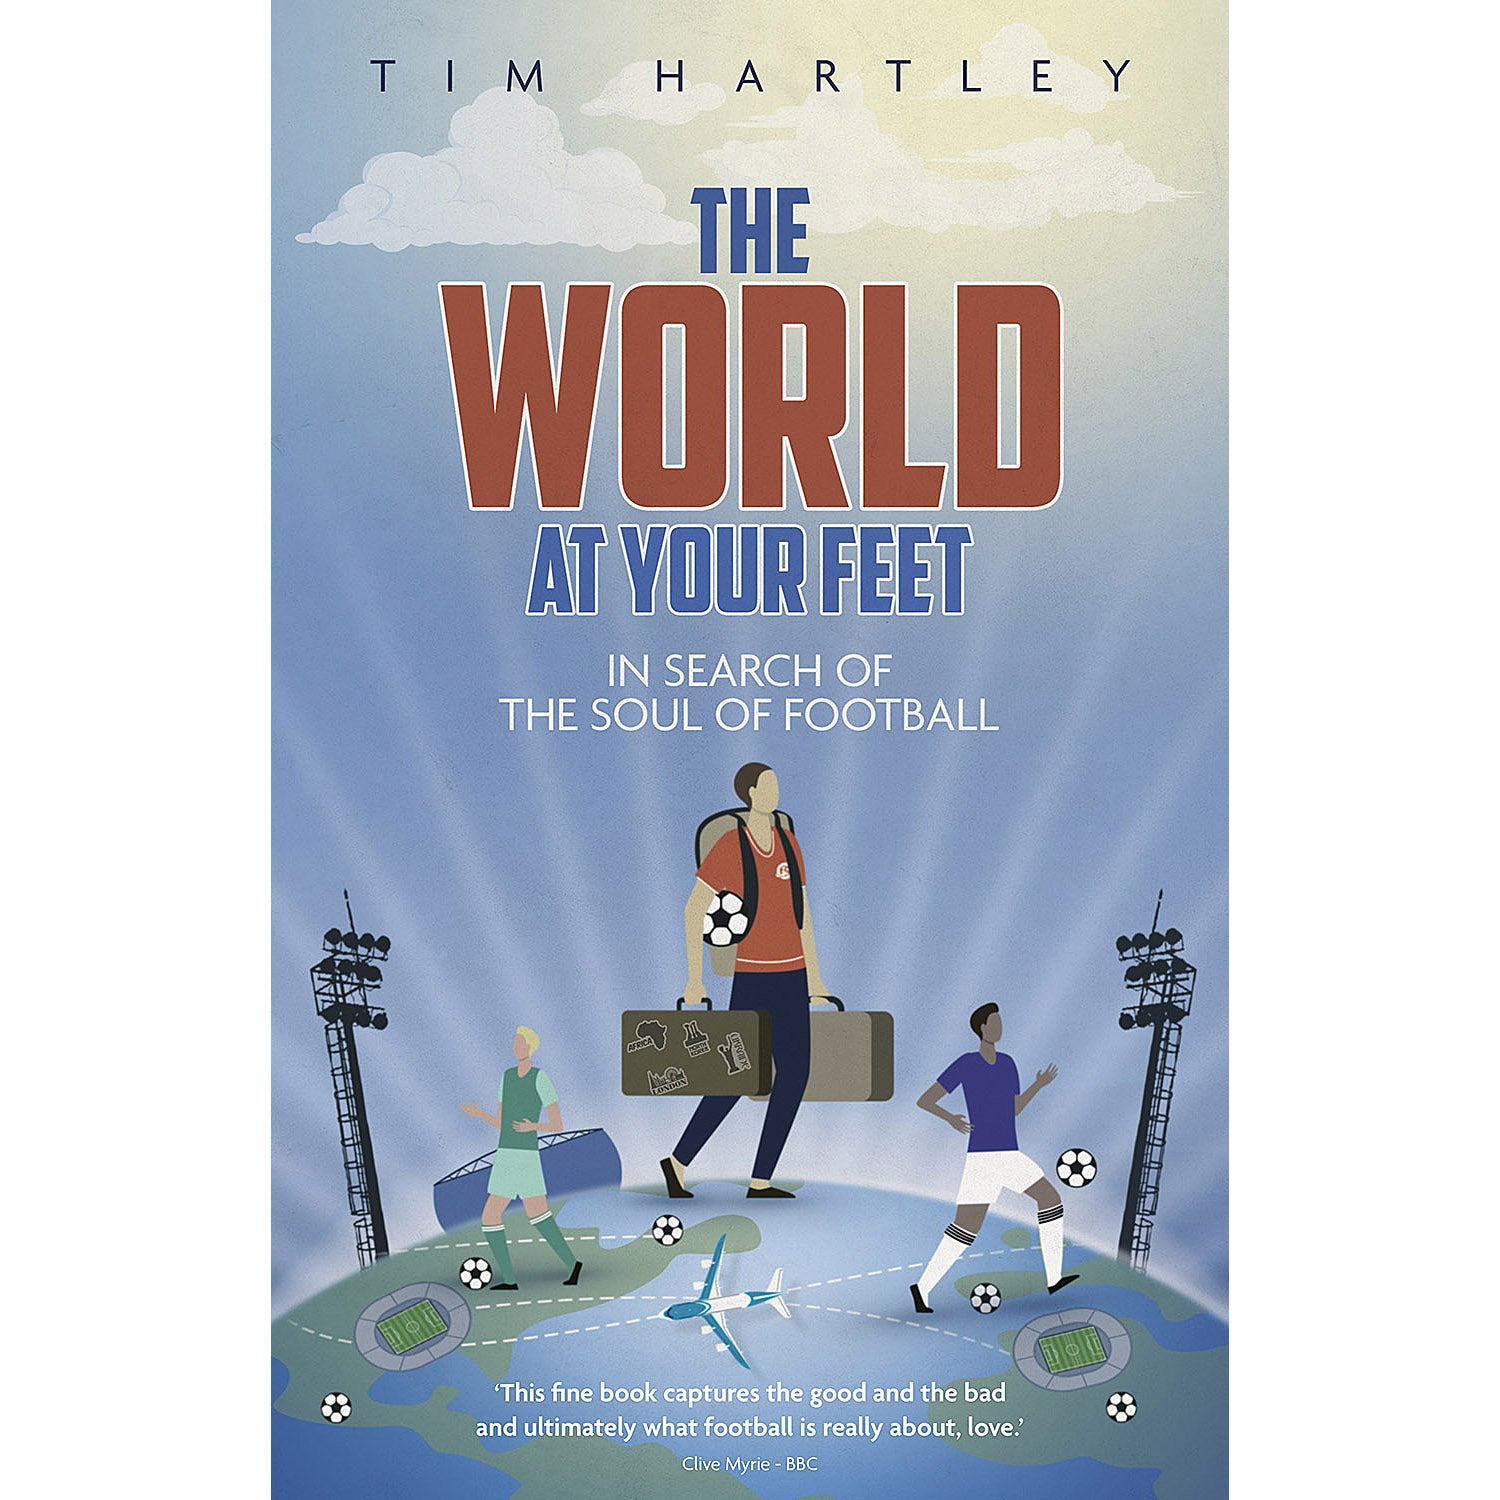 The World at Your Feet – In Search of the Soul of Football